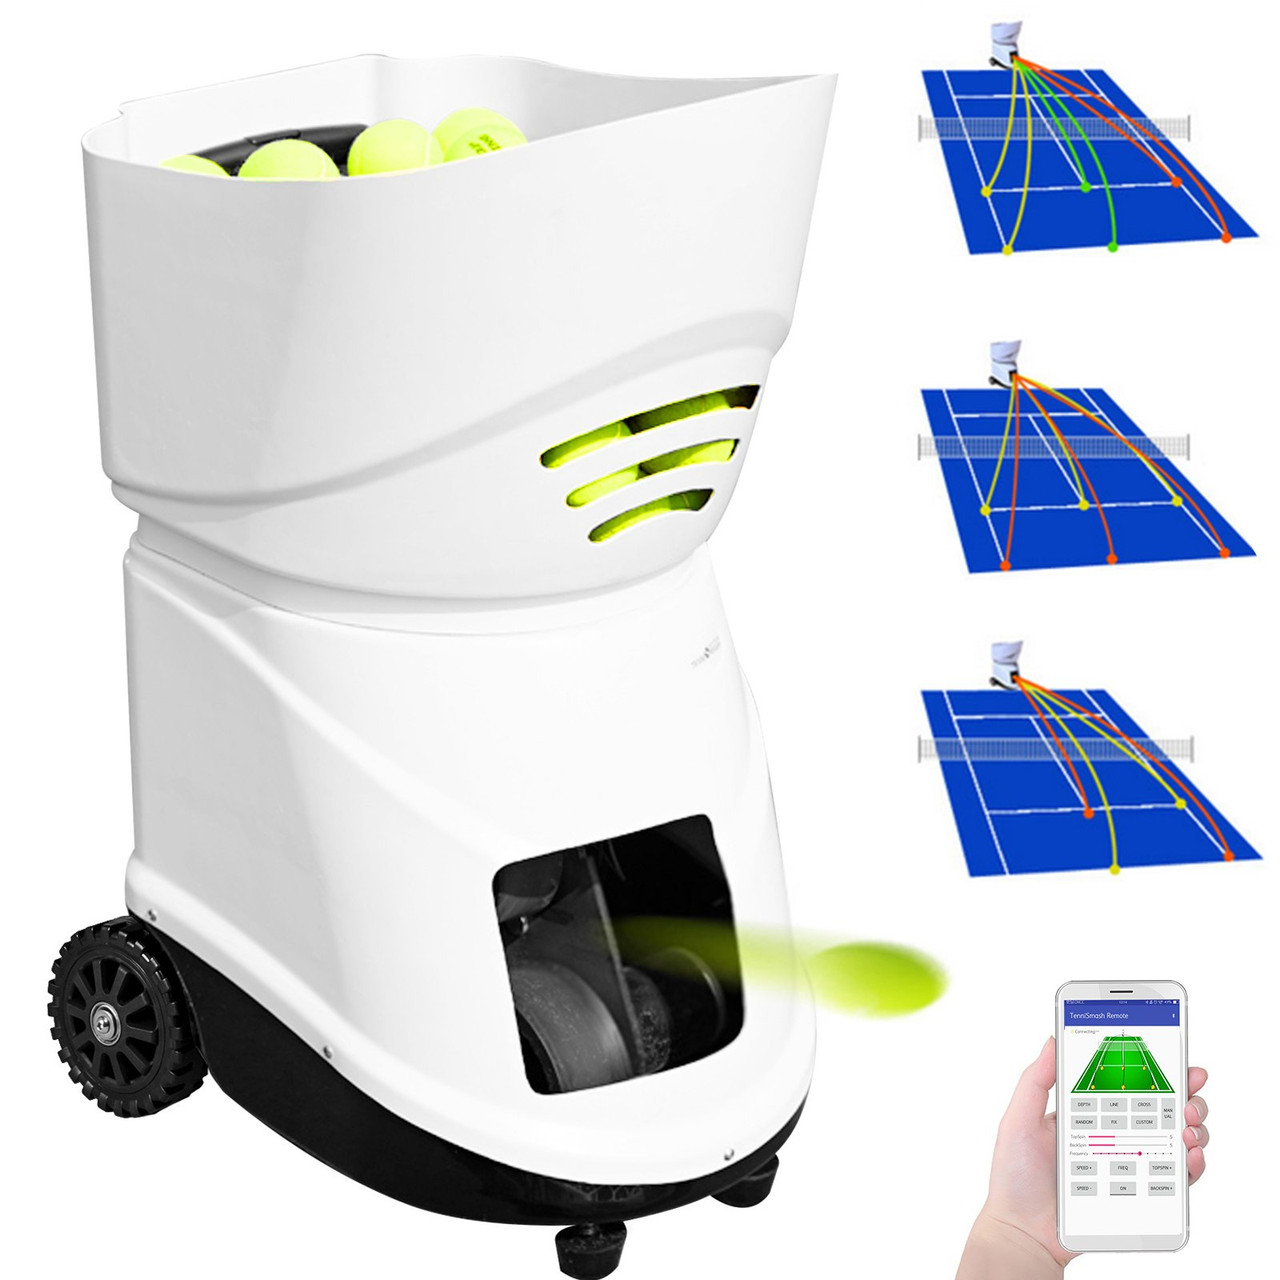 Portable Tennis Ball Machine?APP Control Count?5 Out Modes?29 Out Lines?Custom 1-20 Point?Adjust 20-140 km per h?40 Pounds?Lasting 6-8 Hours?150-Ball Capacity